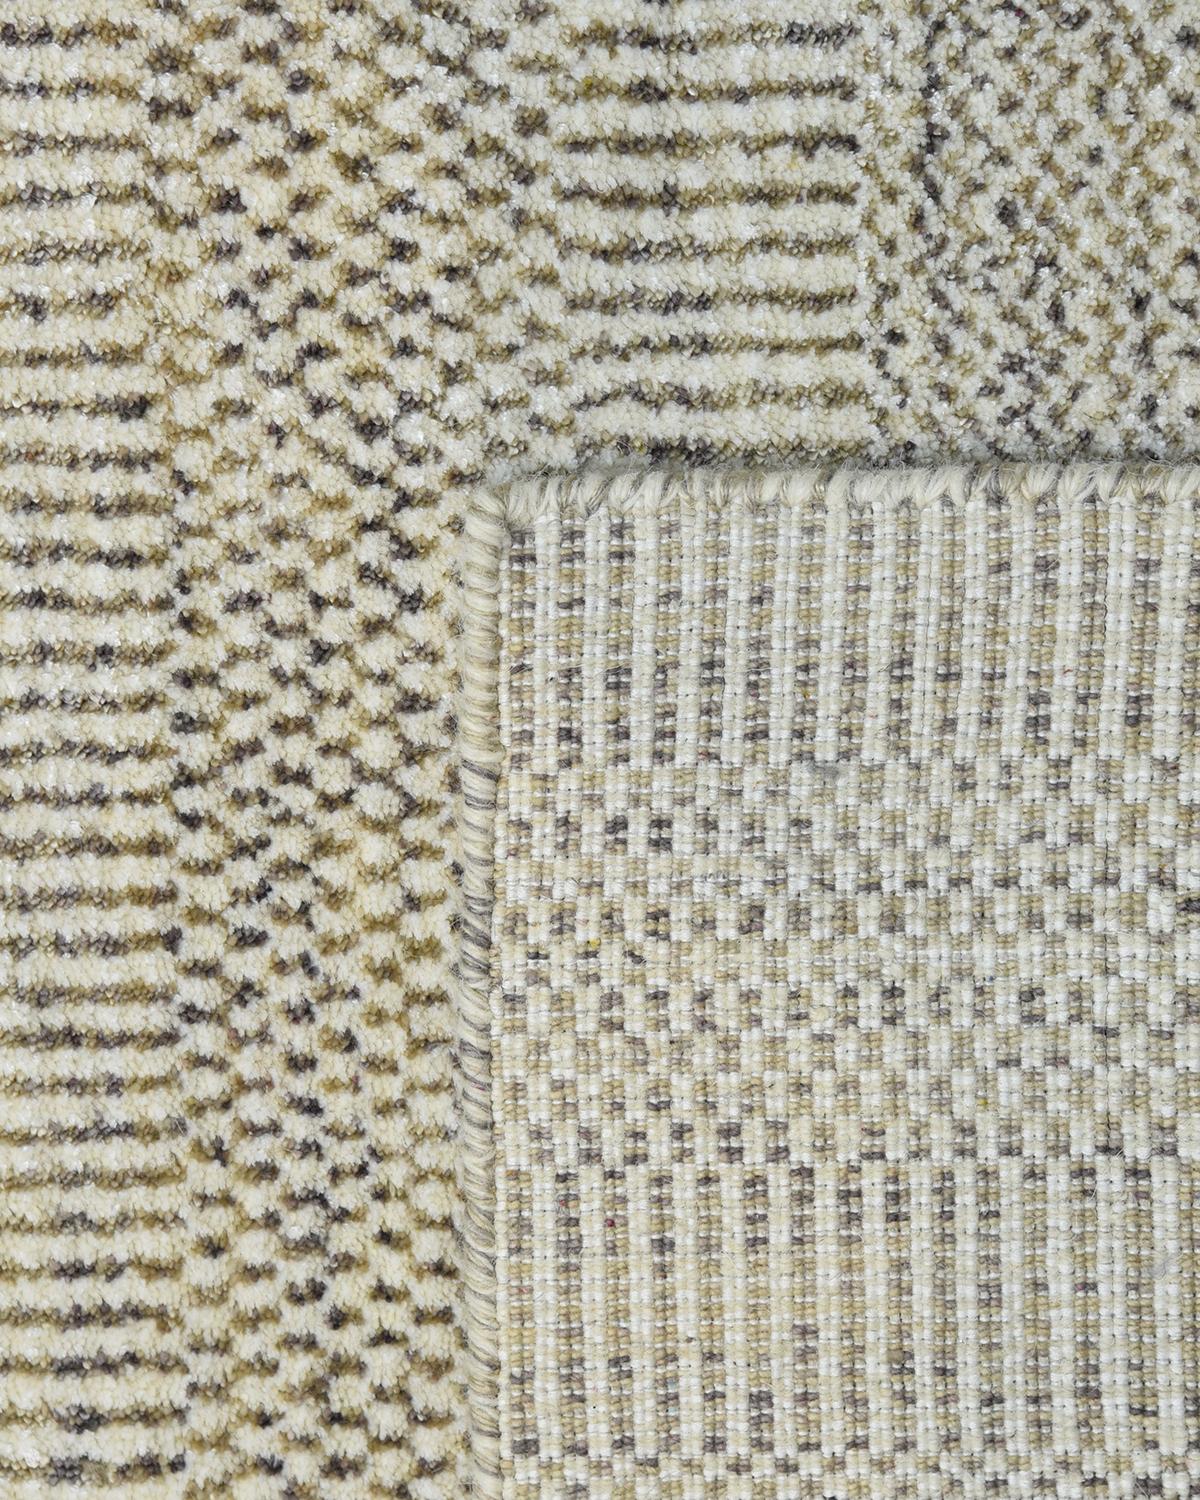 Solo Rugs Deloris Contemporary Striped Handmade Area Rug Beige In Distressed Condition For Sale In Norwalk, CT